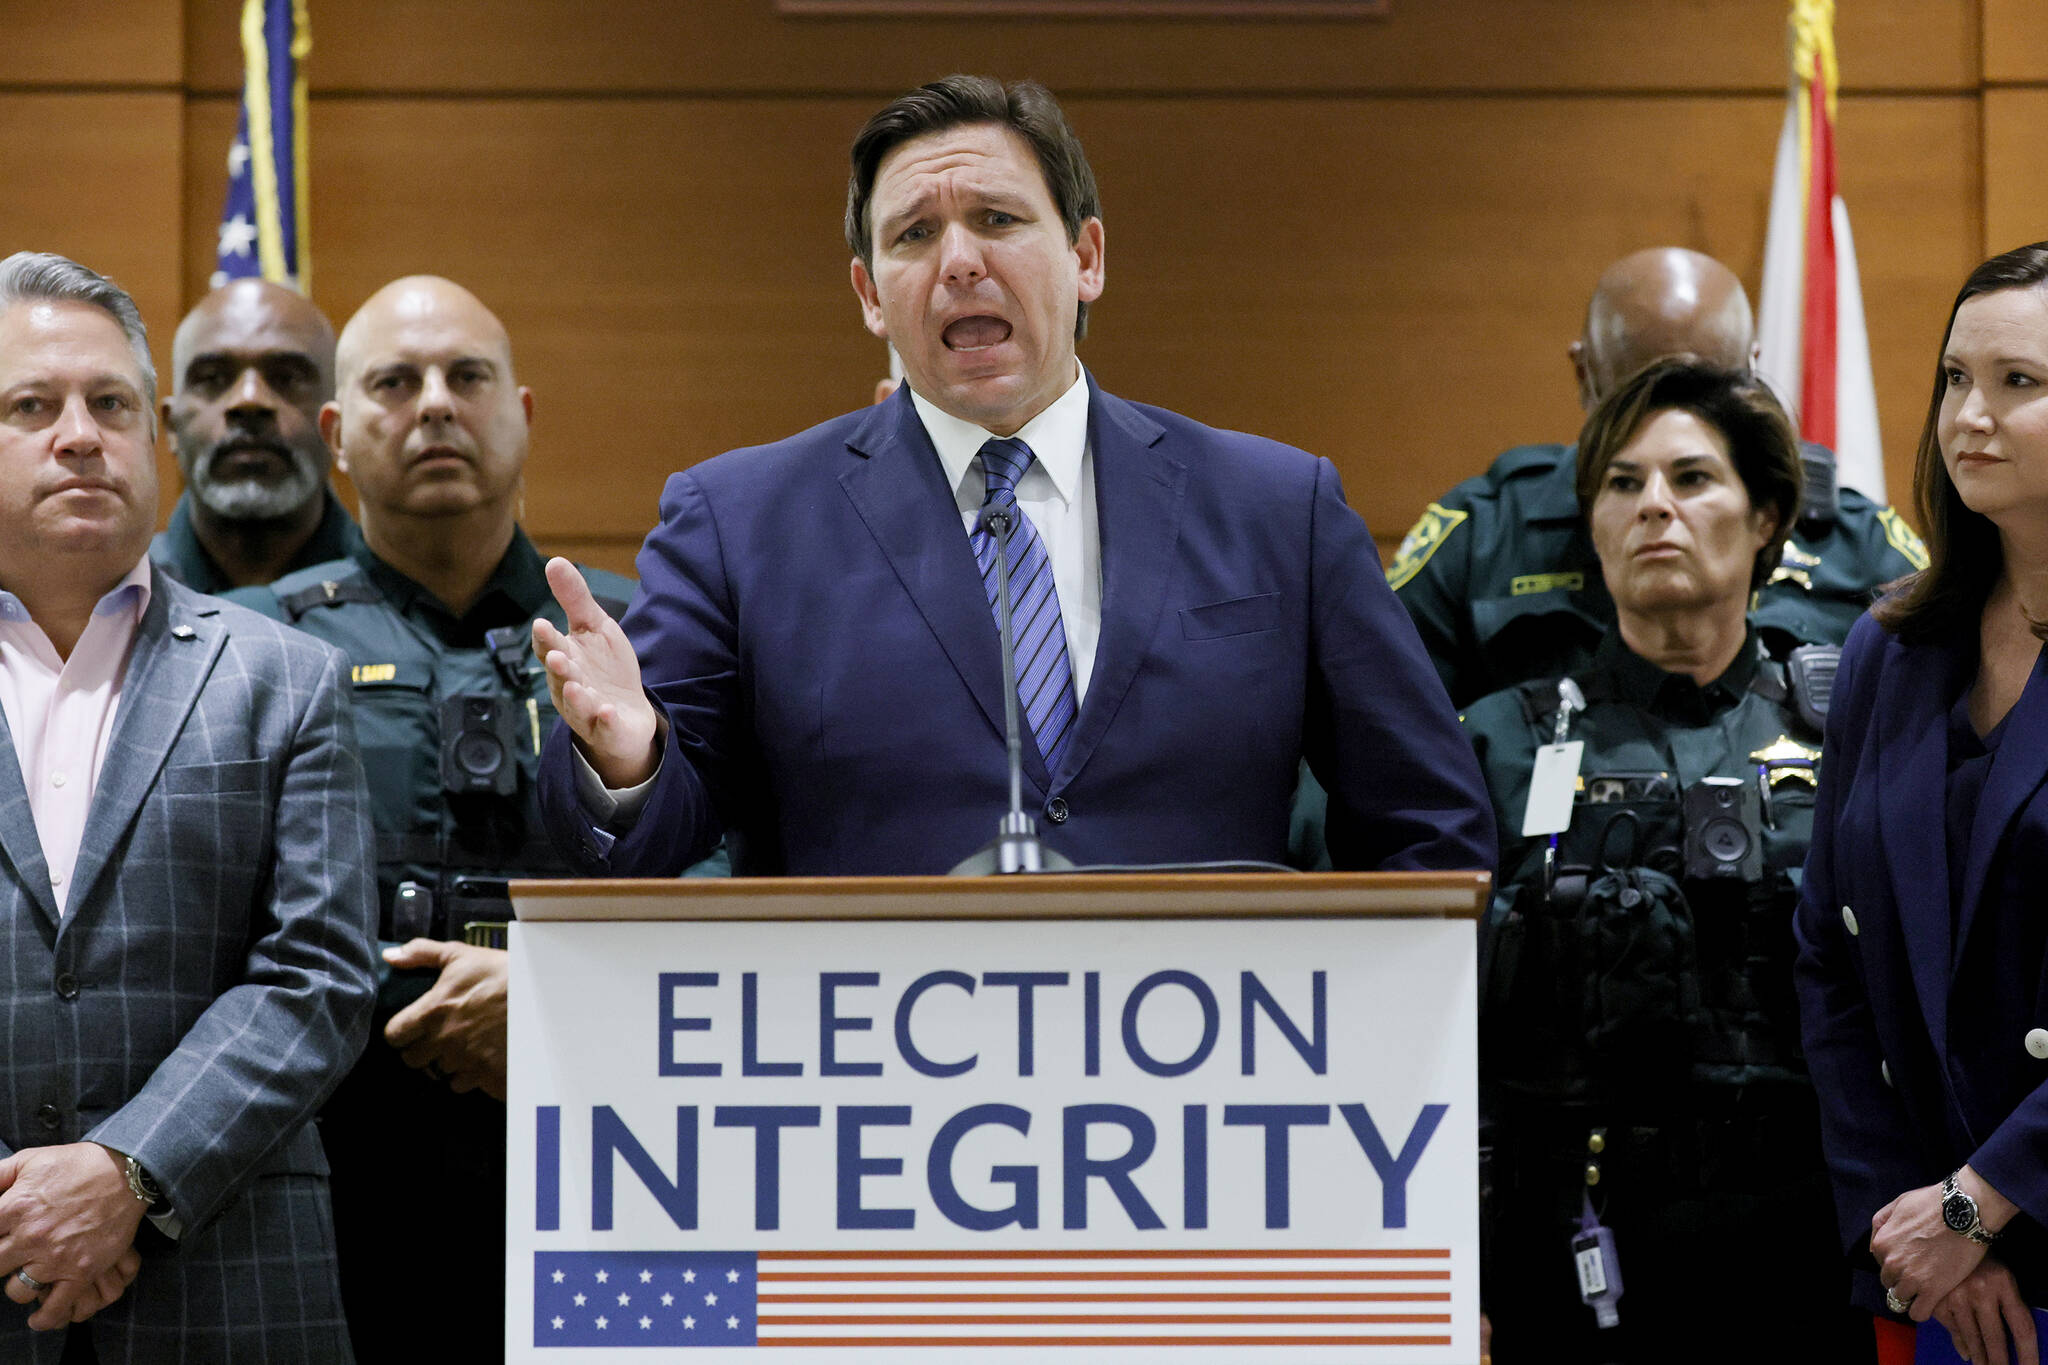 Florida Gov. Ron DeSantis speaks during a news conference at the Broward County Courthouse in Fort Lauderdale, Fla., Aug. 18, 2022. Florida, Georgia, Texas and Virginia all started new law enforcement units to investigate voter fraud in this year’s elections based on former President Donald Trump’s lies about the 2020 presidential contest. So far, those units seem to have produced more headlines than actual cases. (Amy Beth Bennett / South Florida Sun-Sentinel)